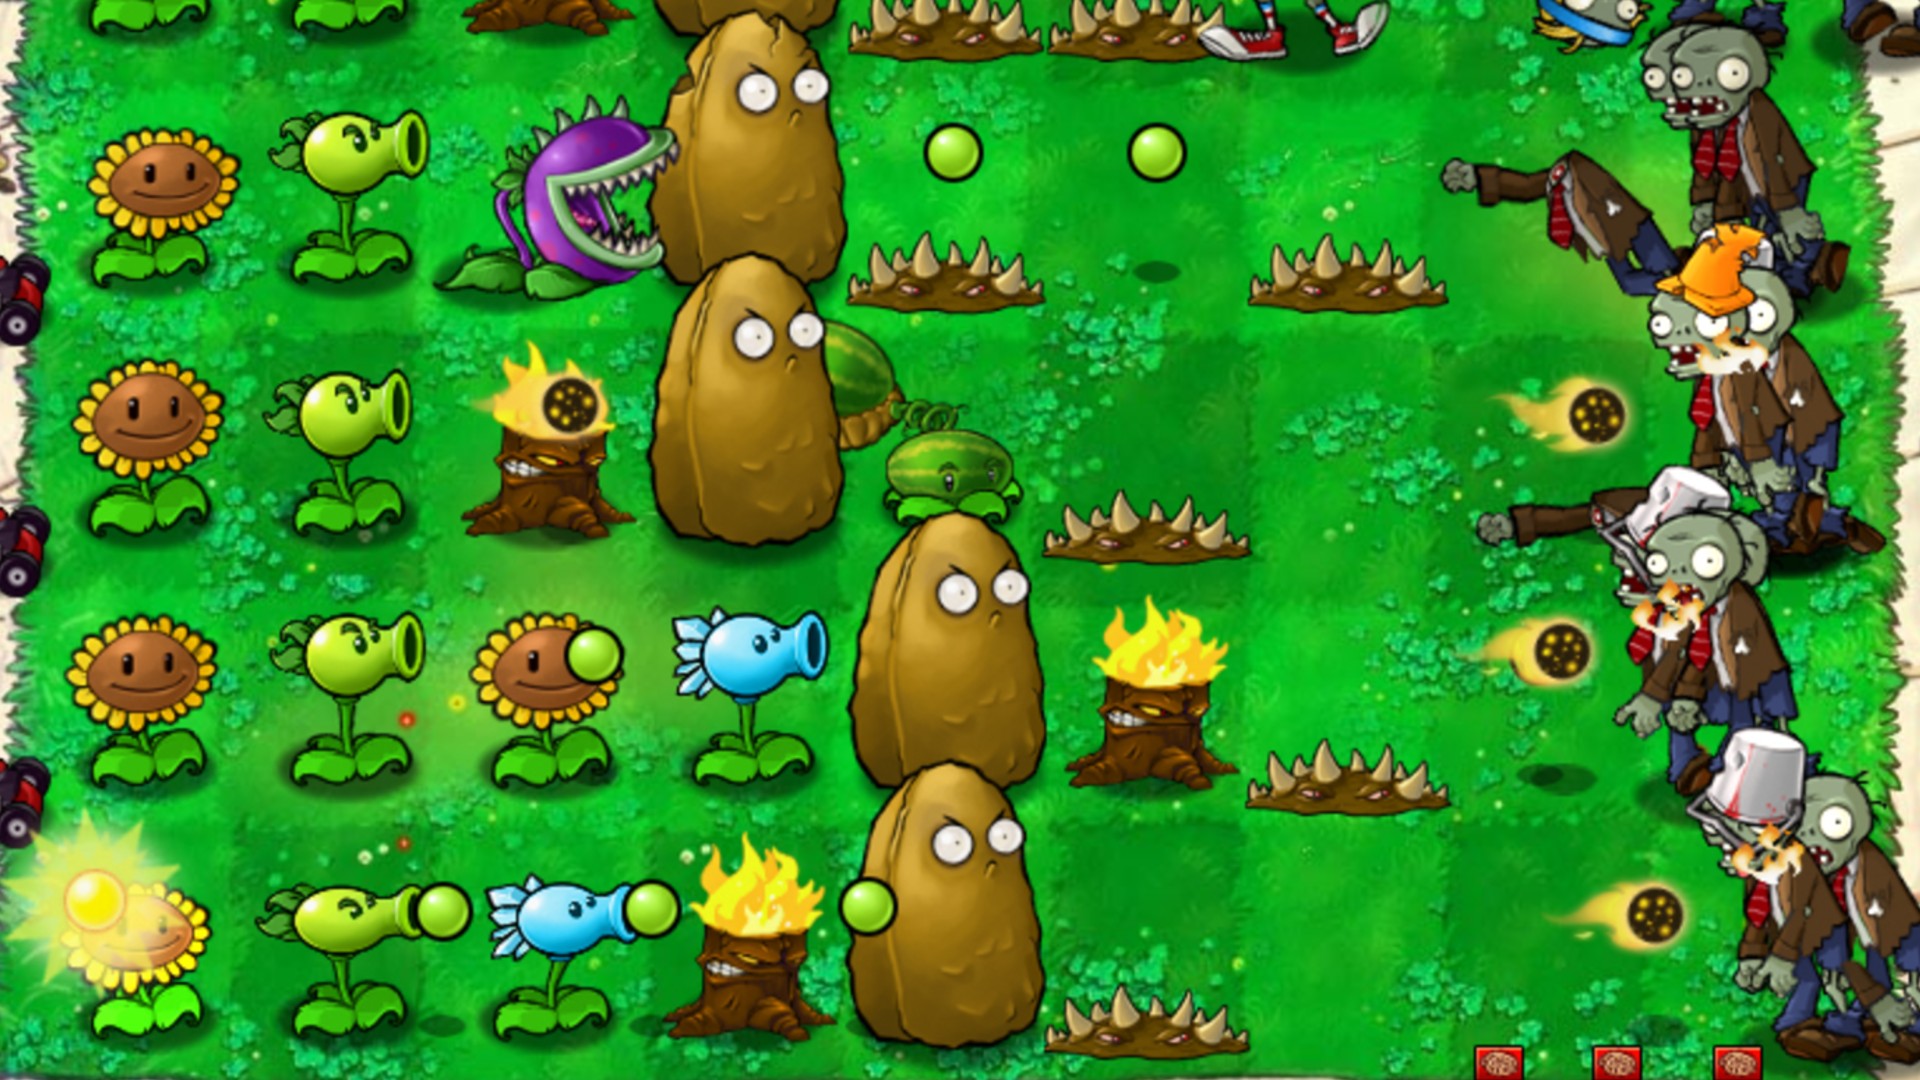 Best management game: Zombies approach the lawn from the right; in Plants vs. Zombies, the plants on the left shoot peas at them.